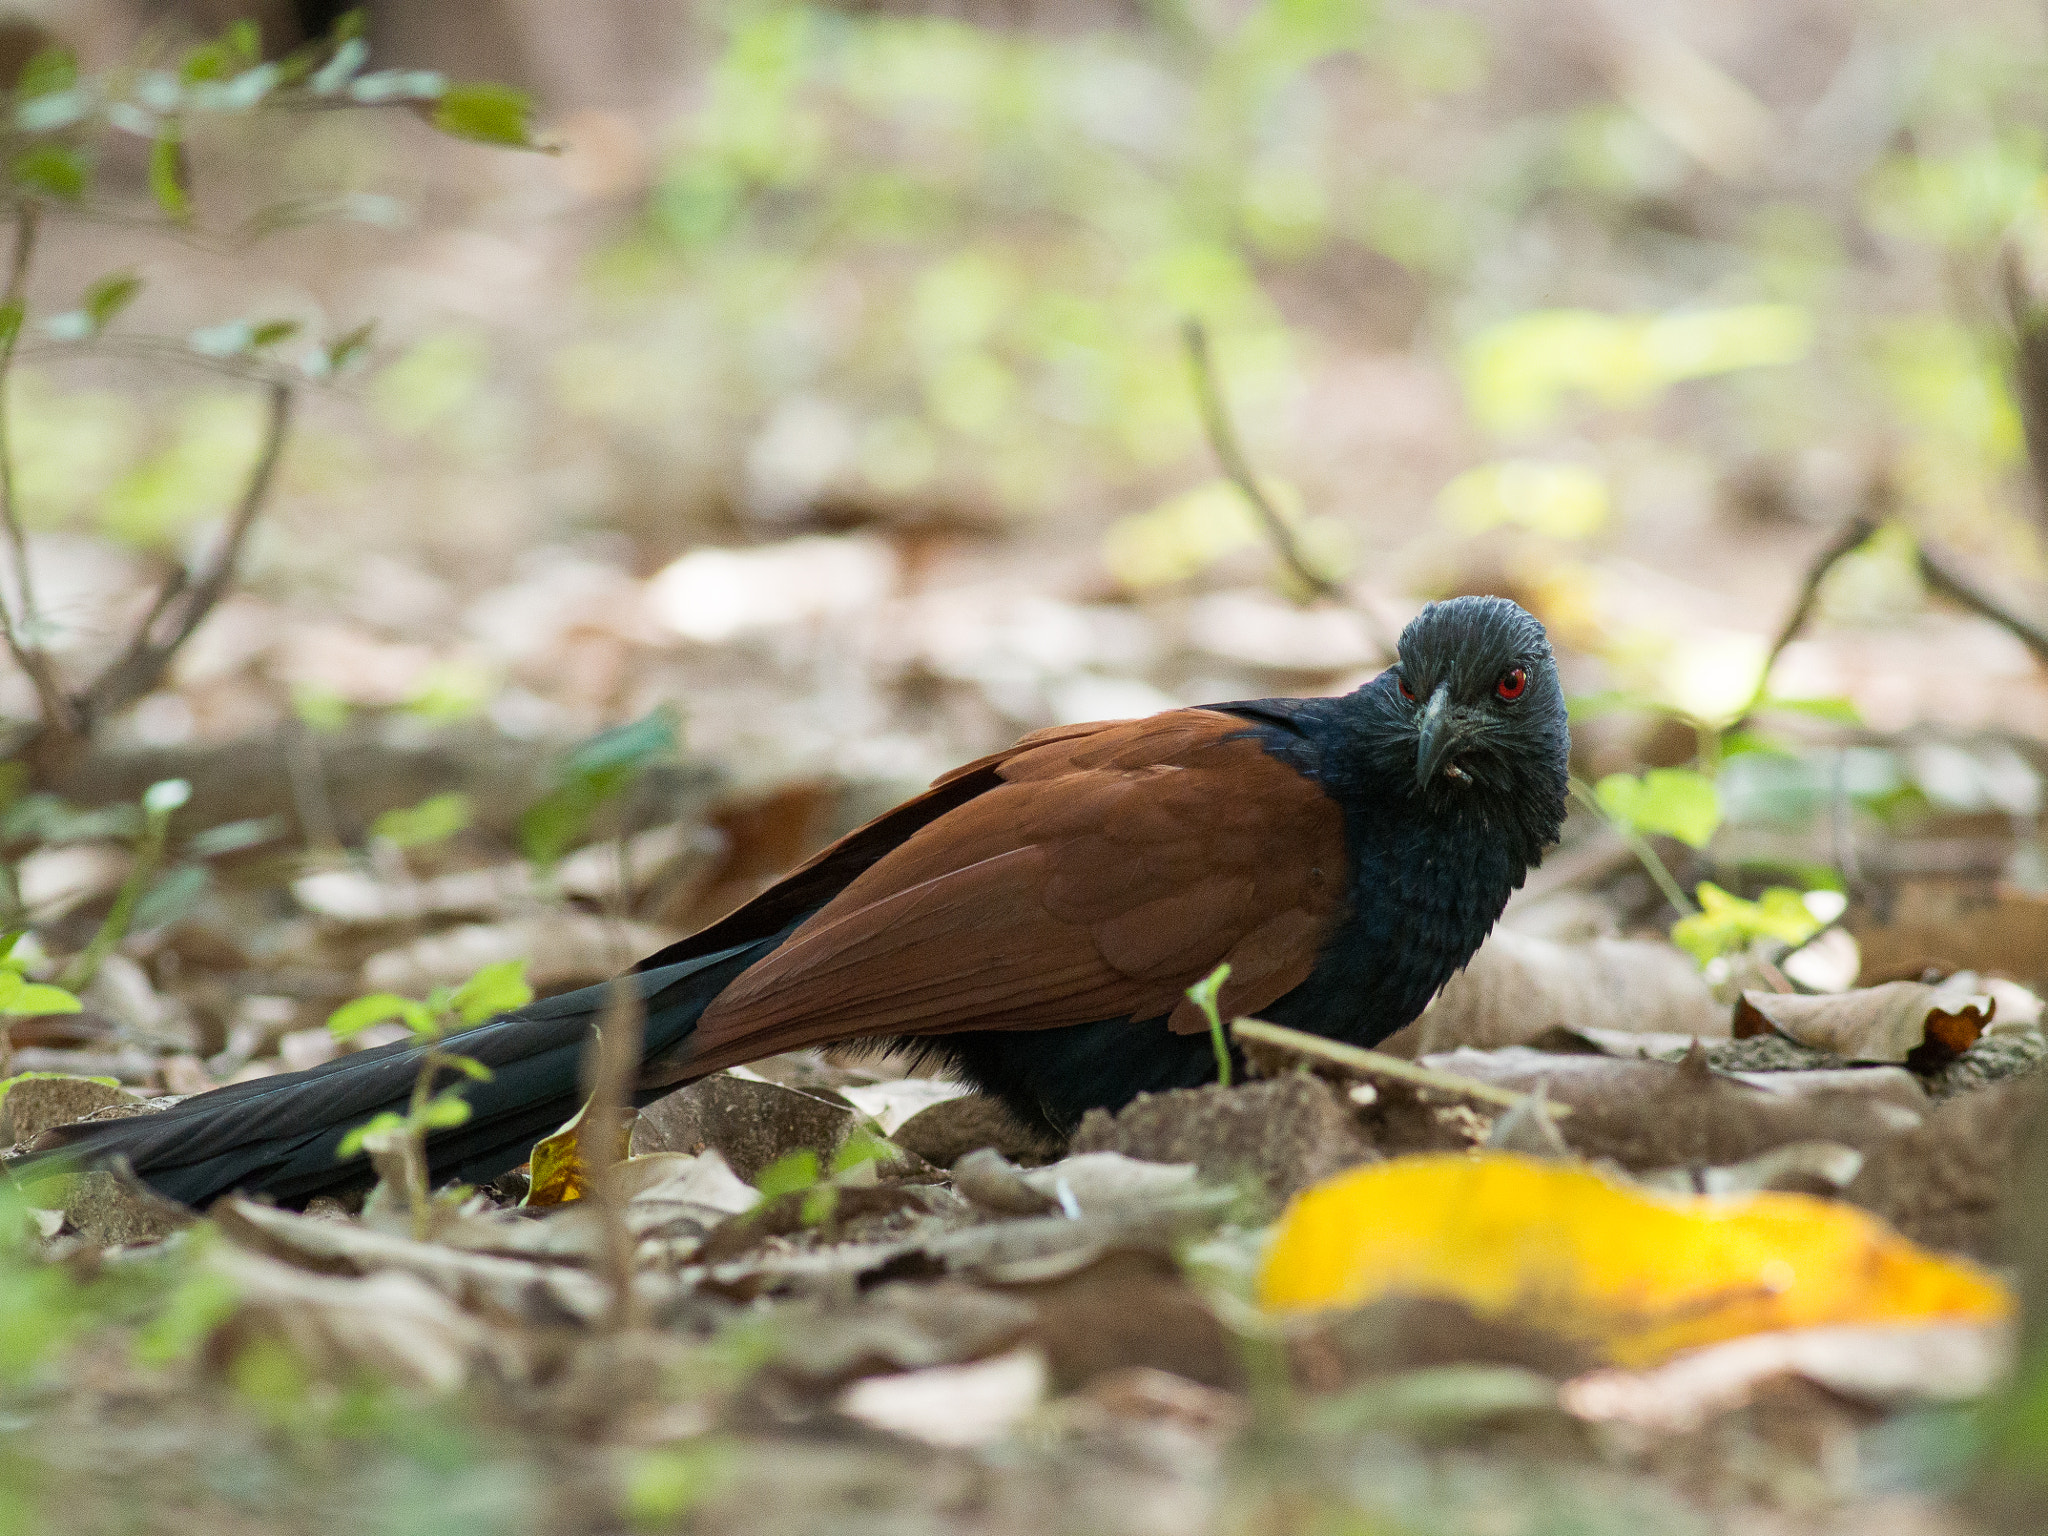 Metabones 400/5.6 sample photo. Greater coucal photography